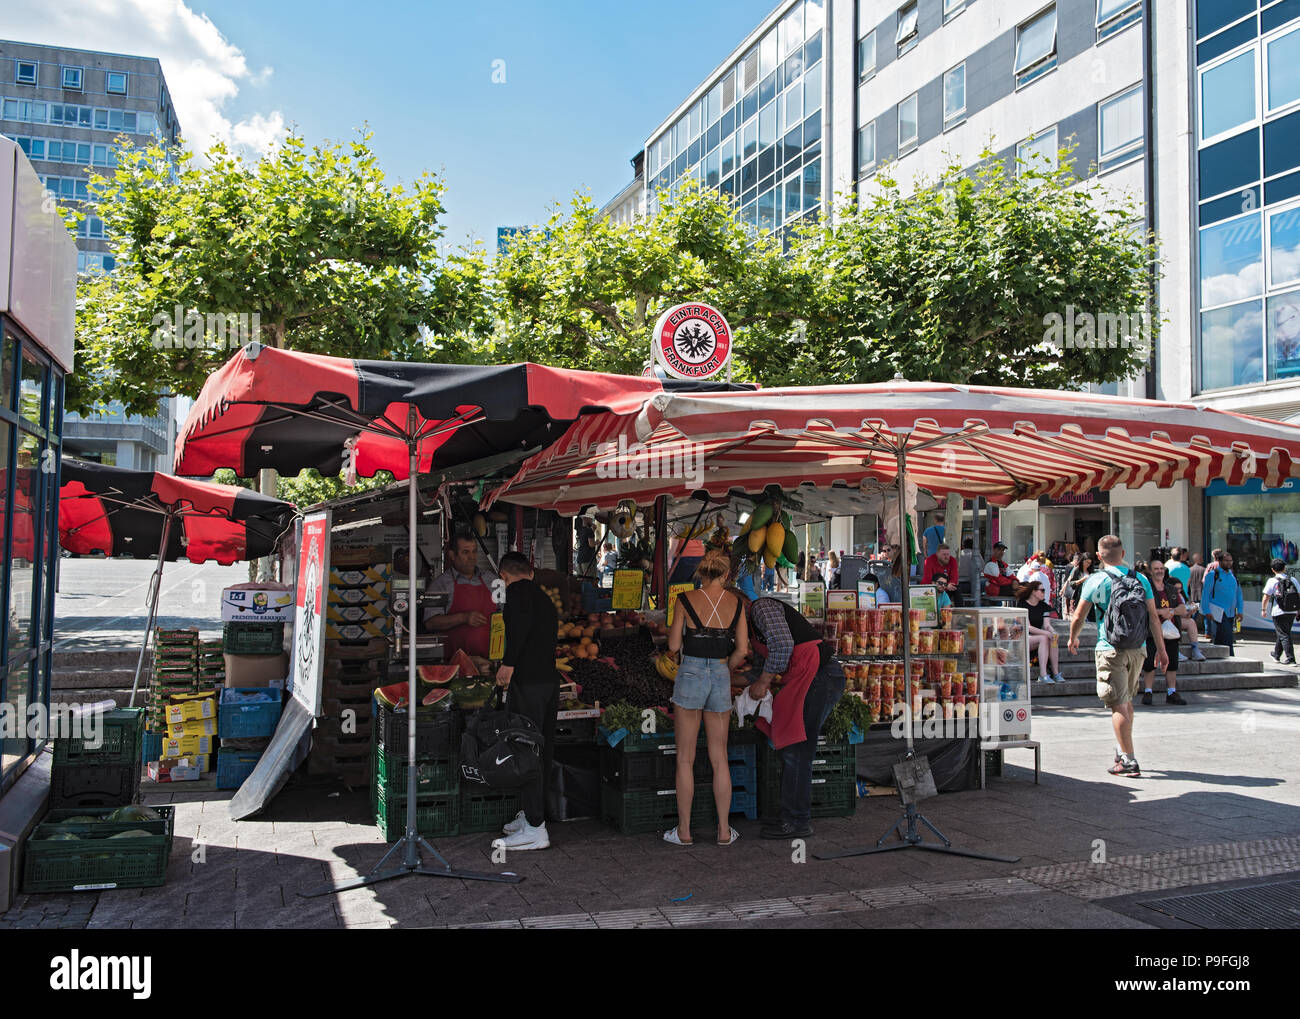 Fruit and vegetable stall at the konstabler wache, frankfurt am main, germany. Stock Photo